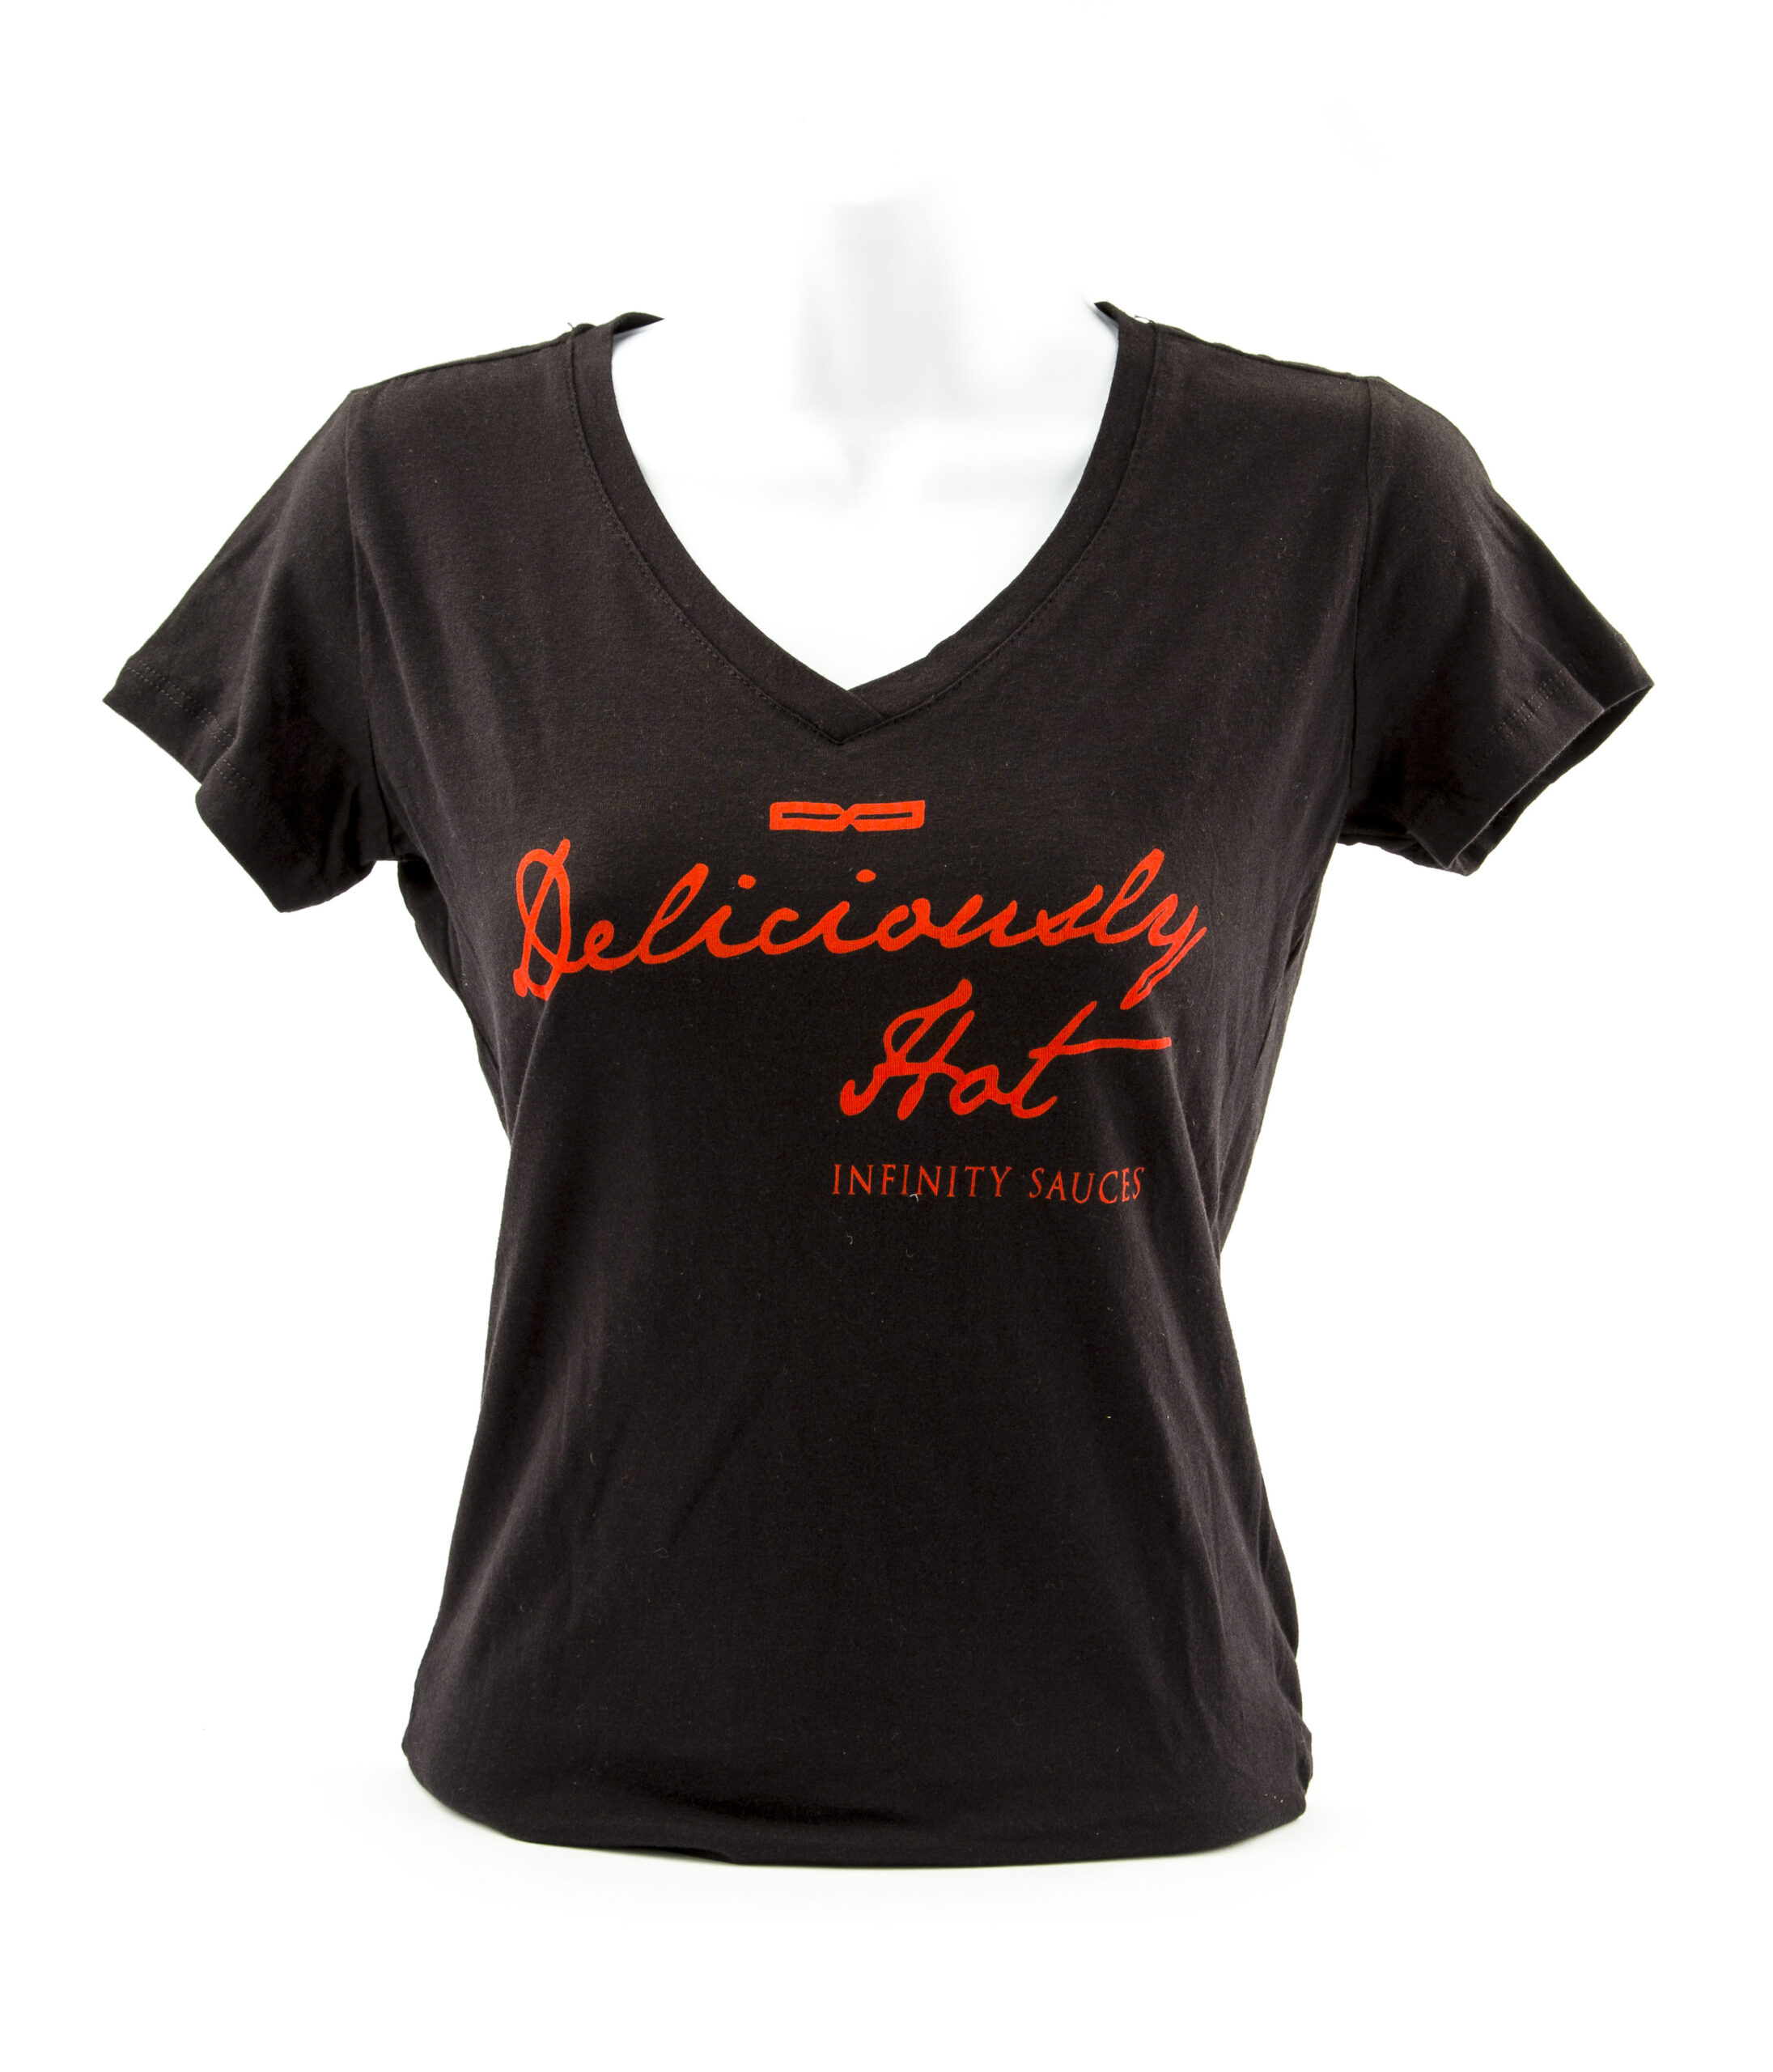 Deliciously Hot Ladies “V” Neck Tee | Infinity Sauces